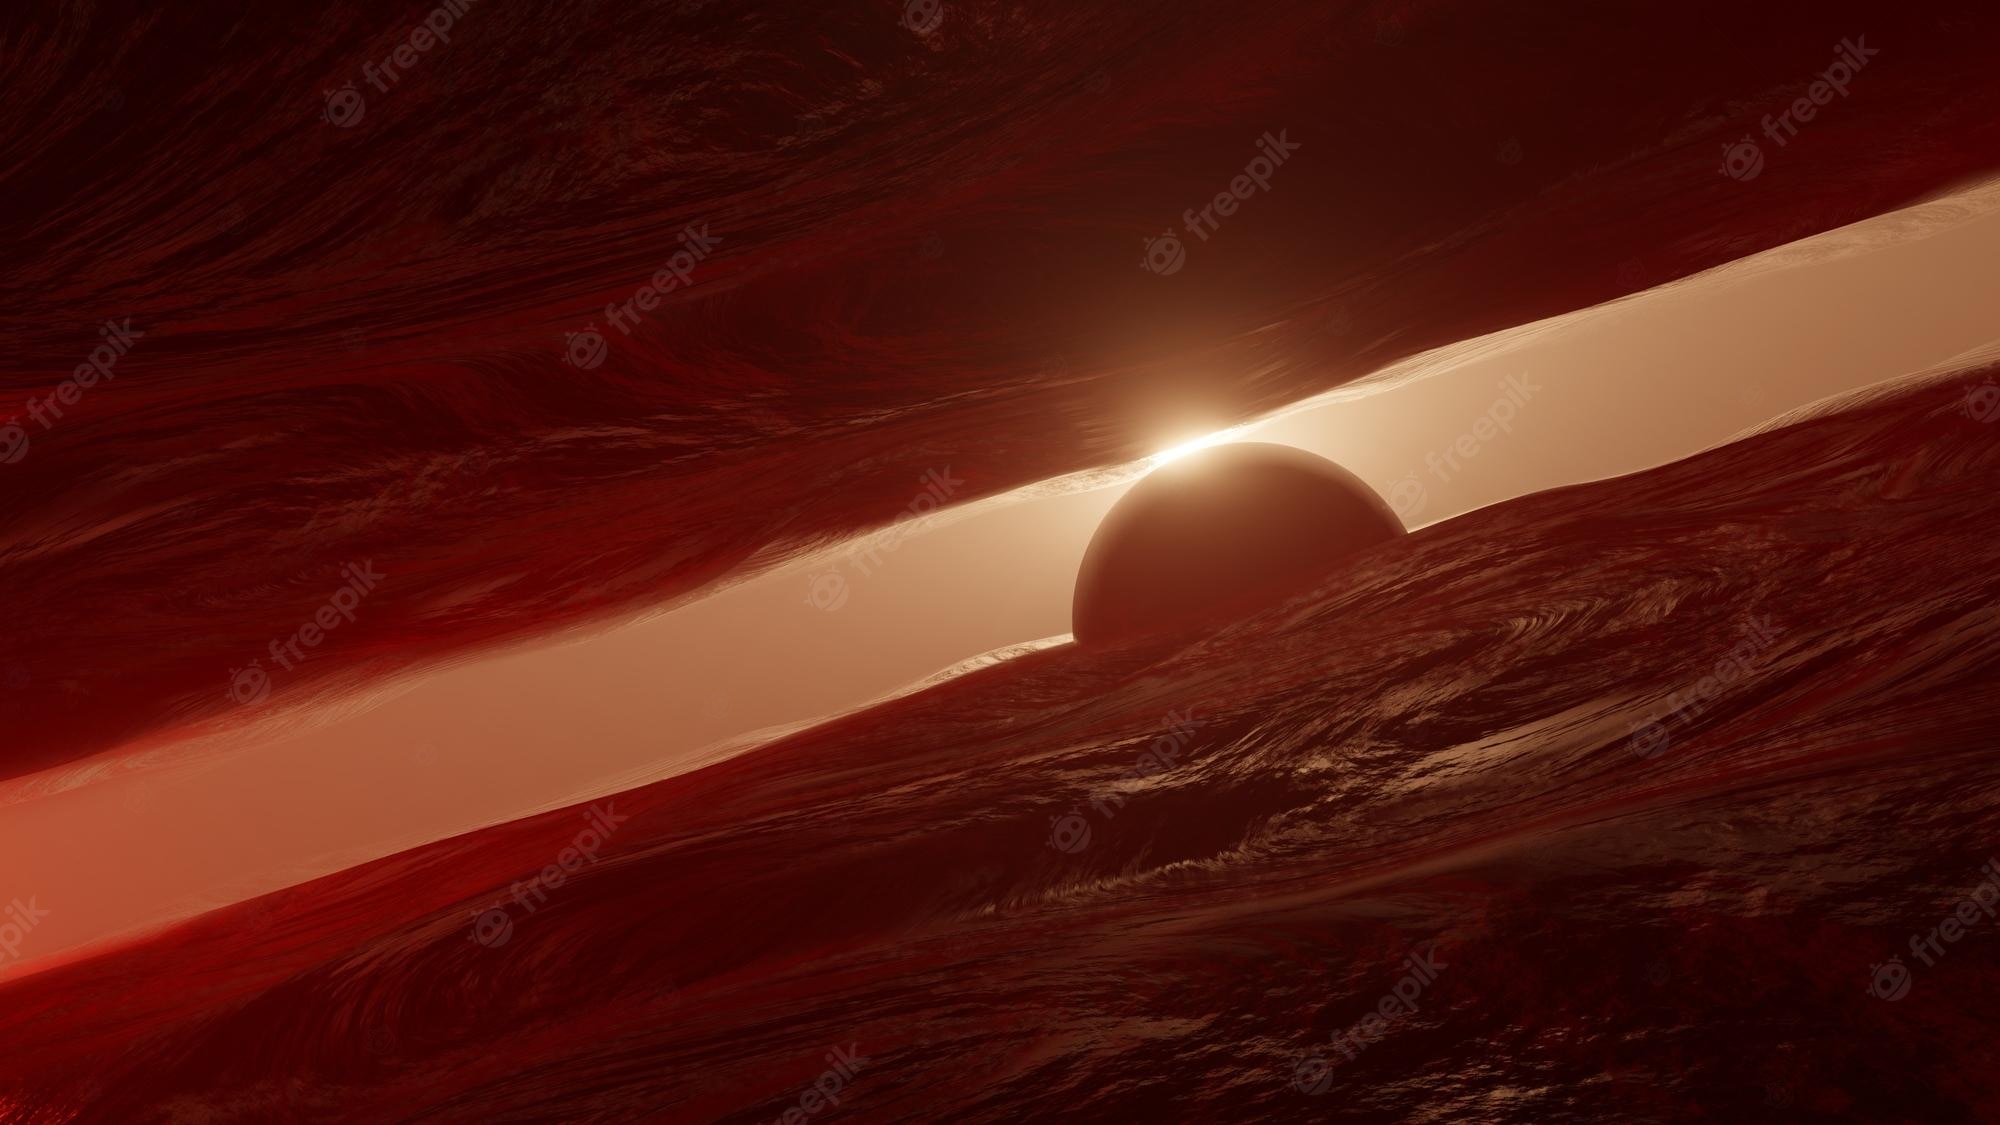 Post Apocalyptic Sunset In Mars 4K
 Wallpapers